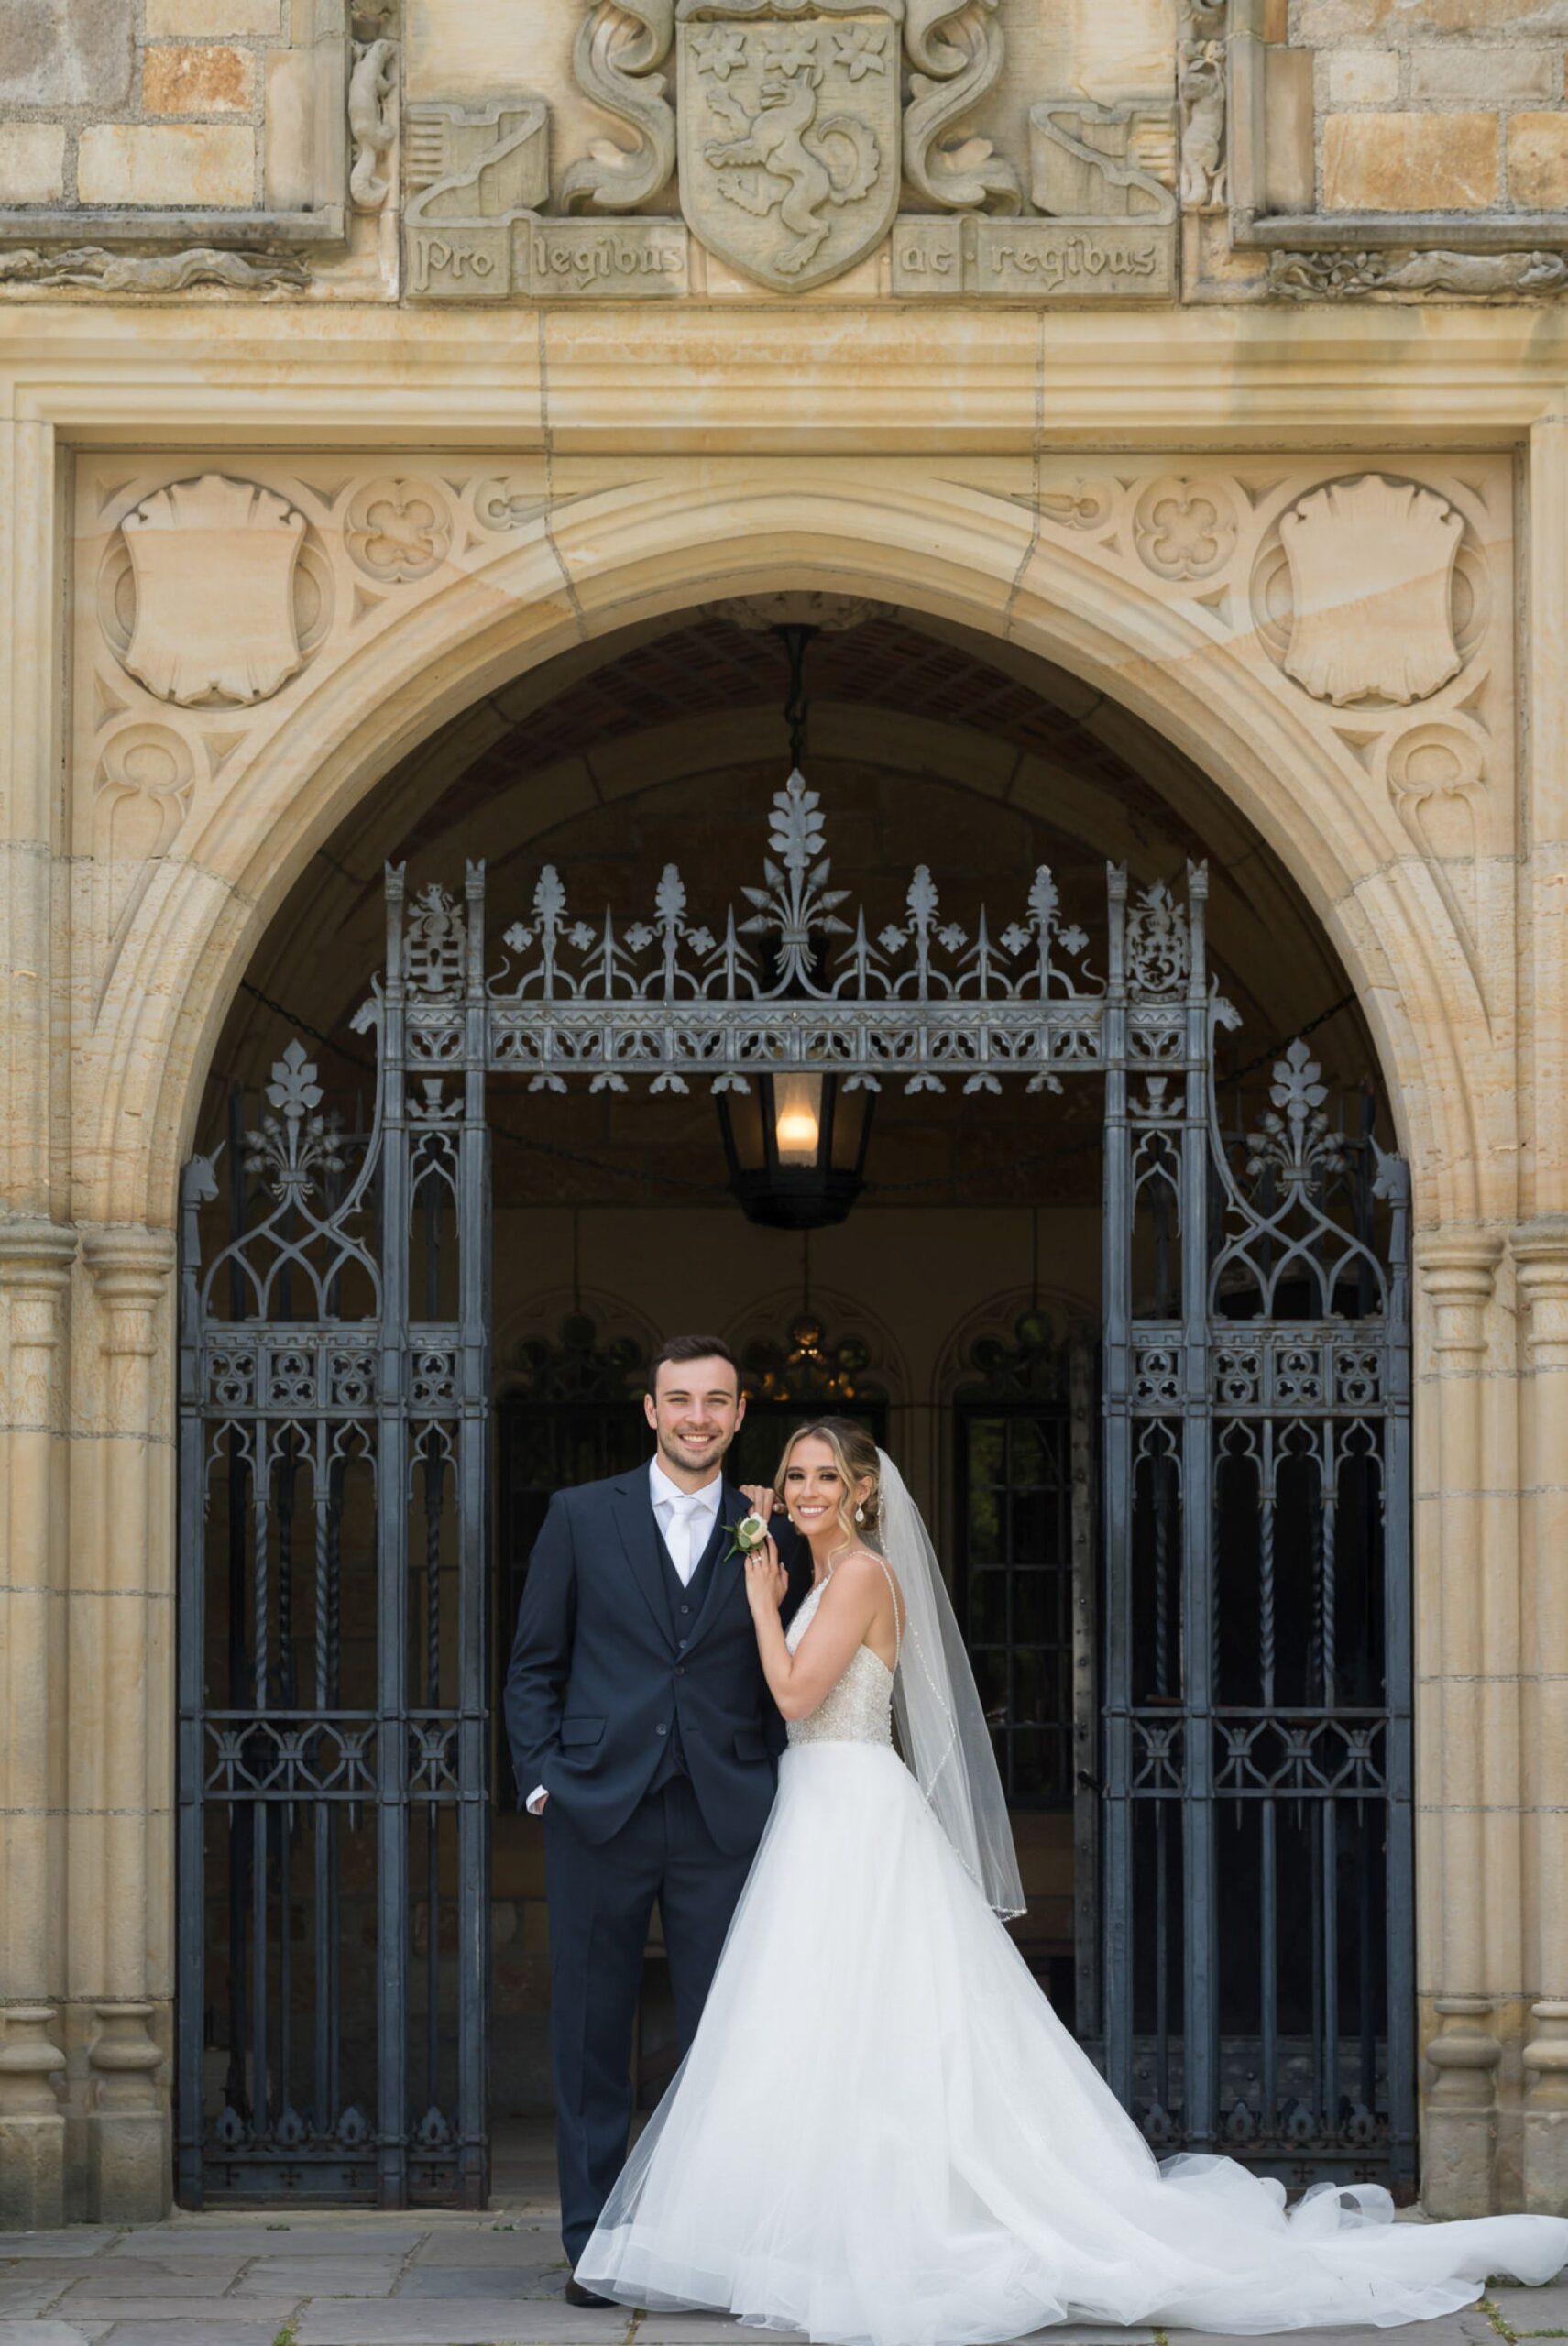 Holding onto his arm, a bride and groom pose in front of the main gate at their wedding at Meadowbrook Hall.  